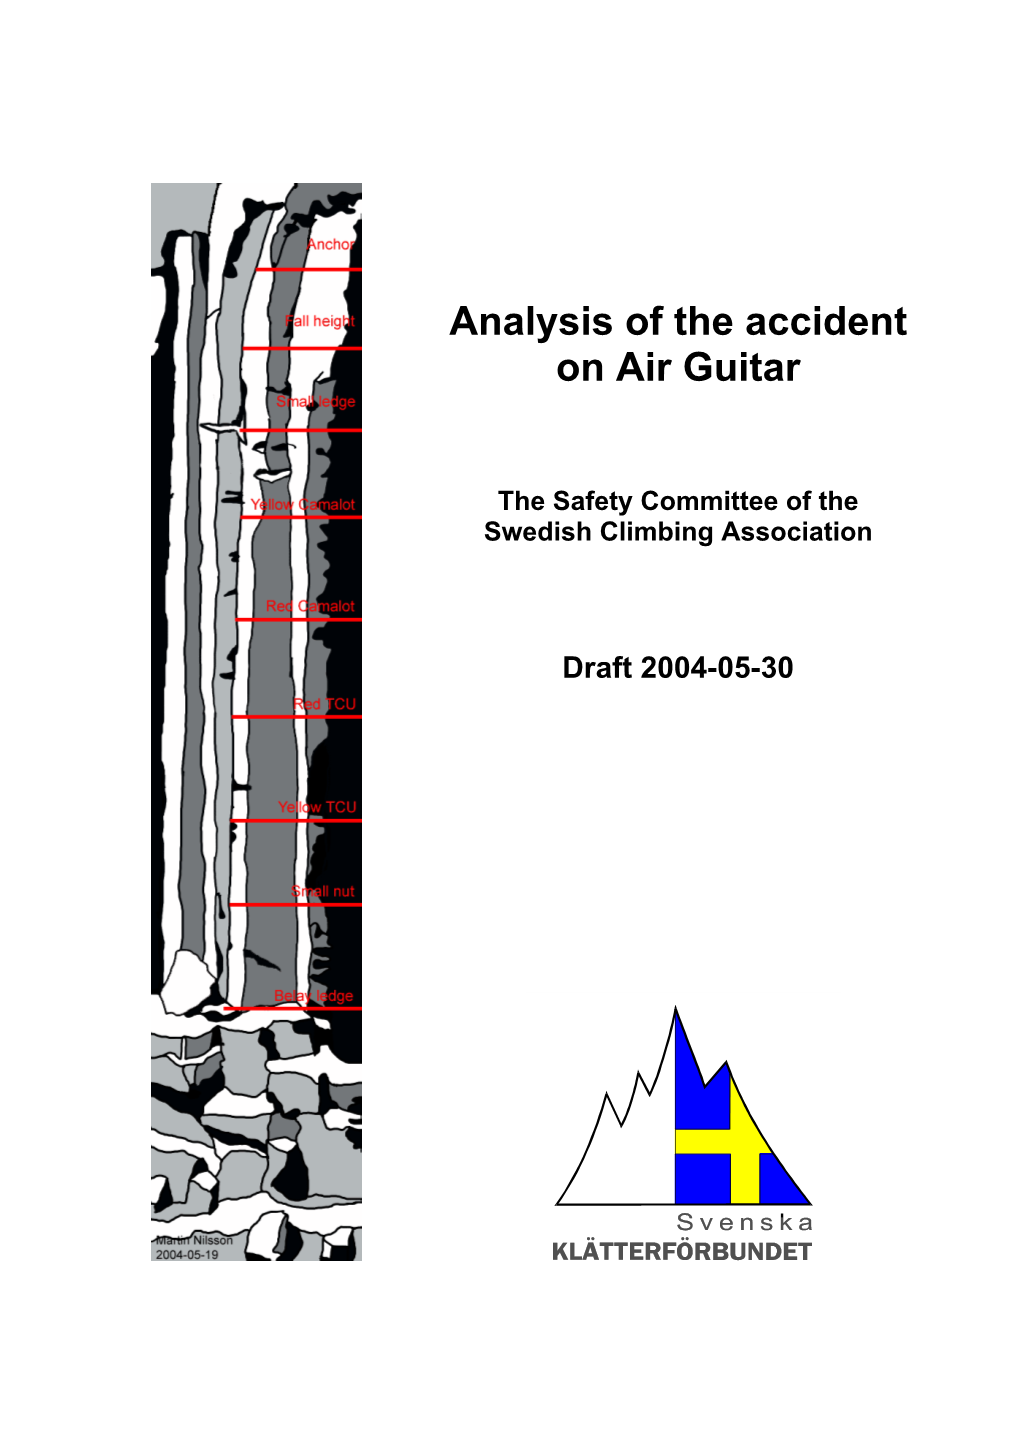 Analysis of the Accident on Air Guitar